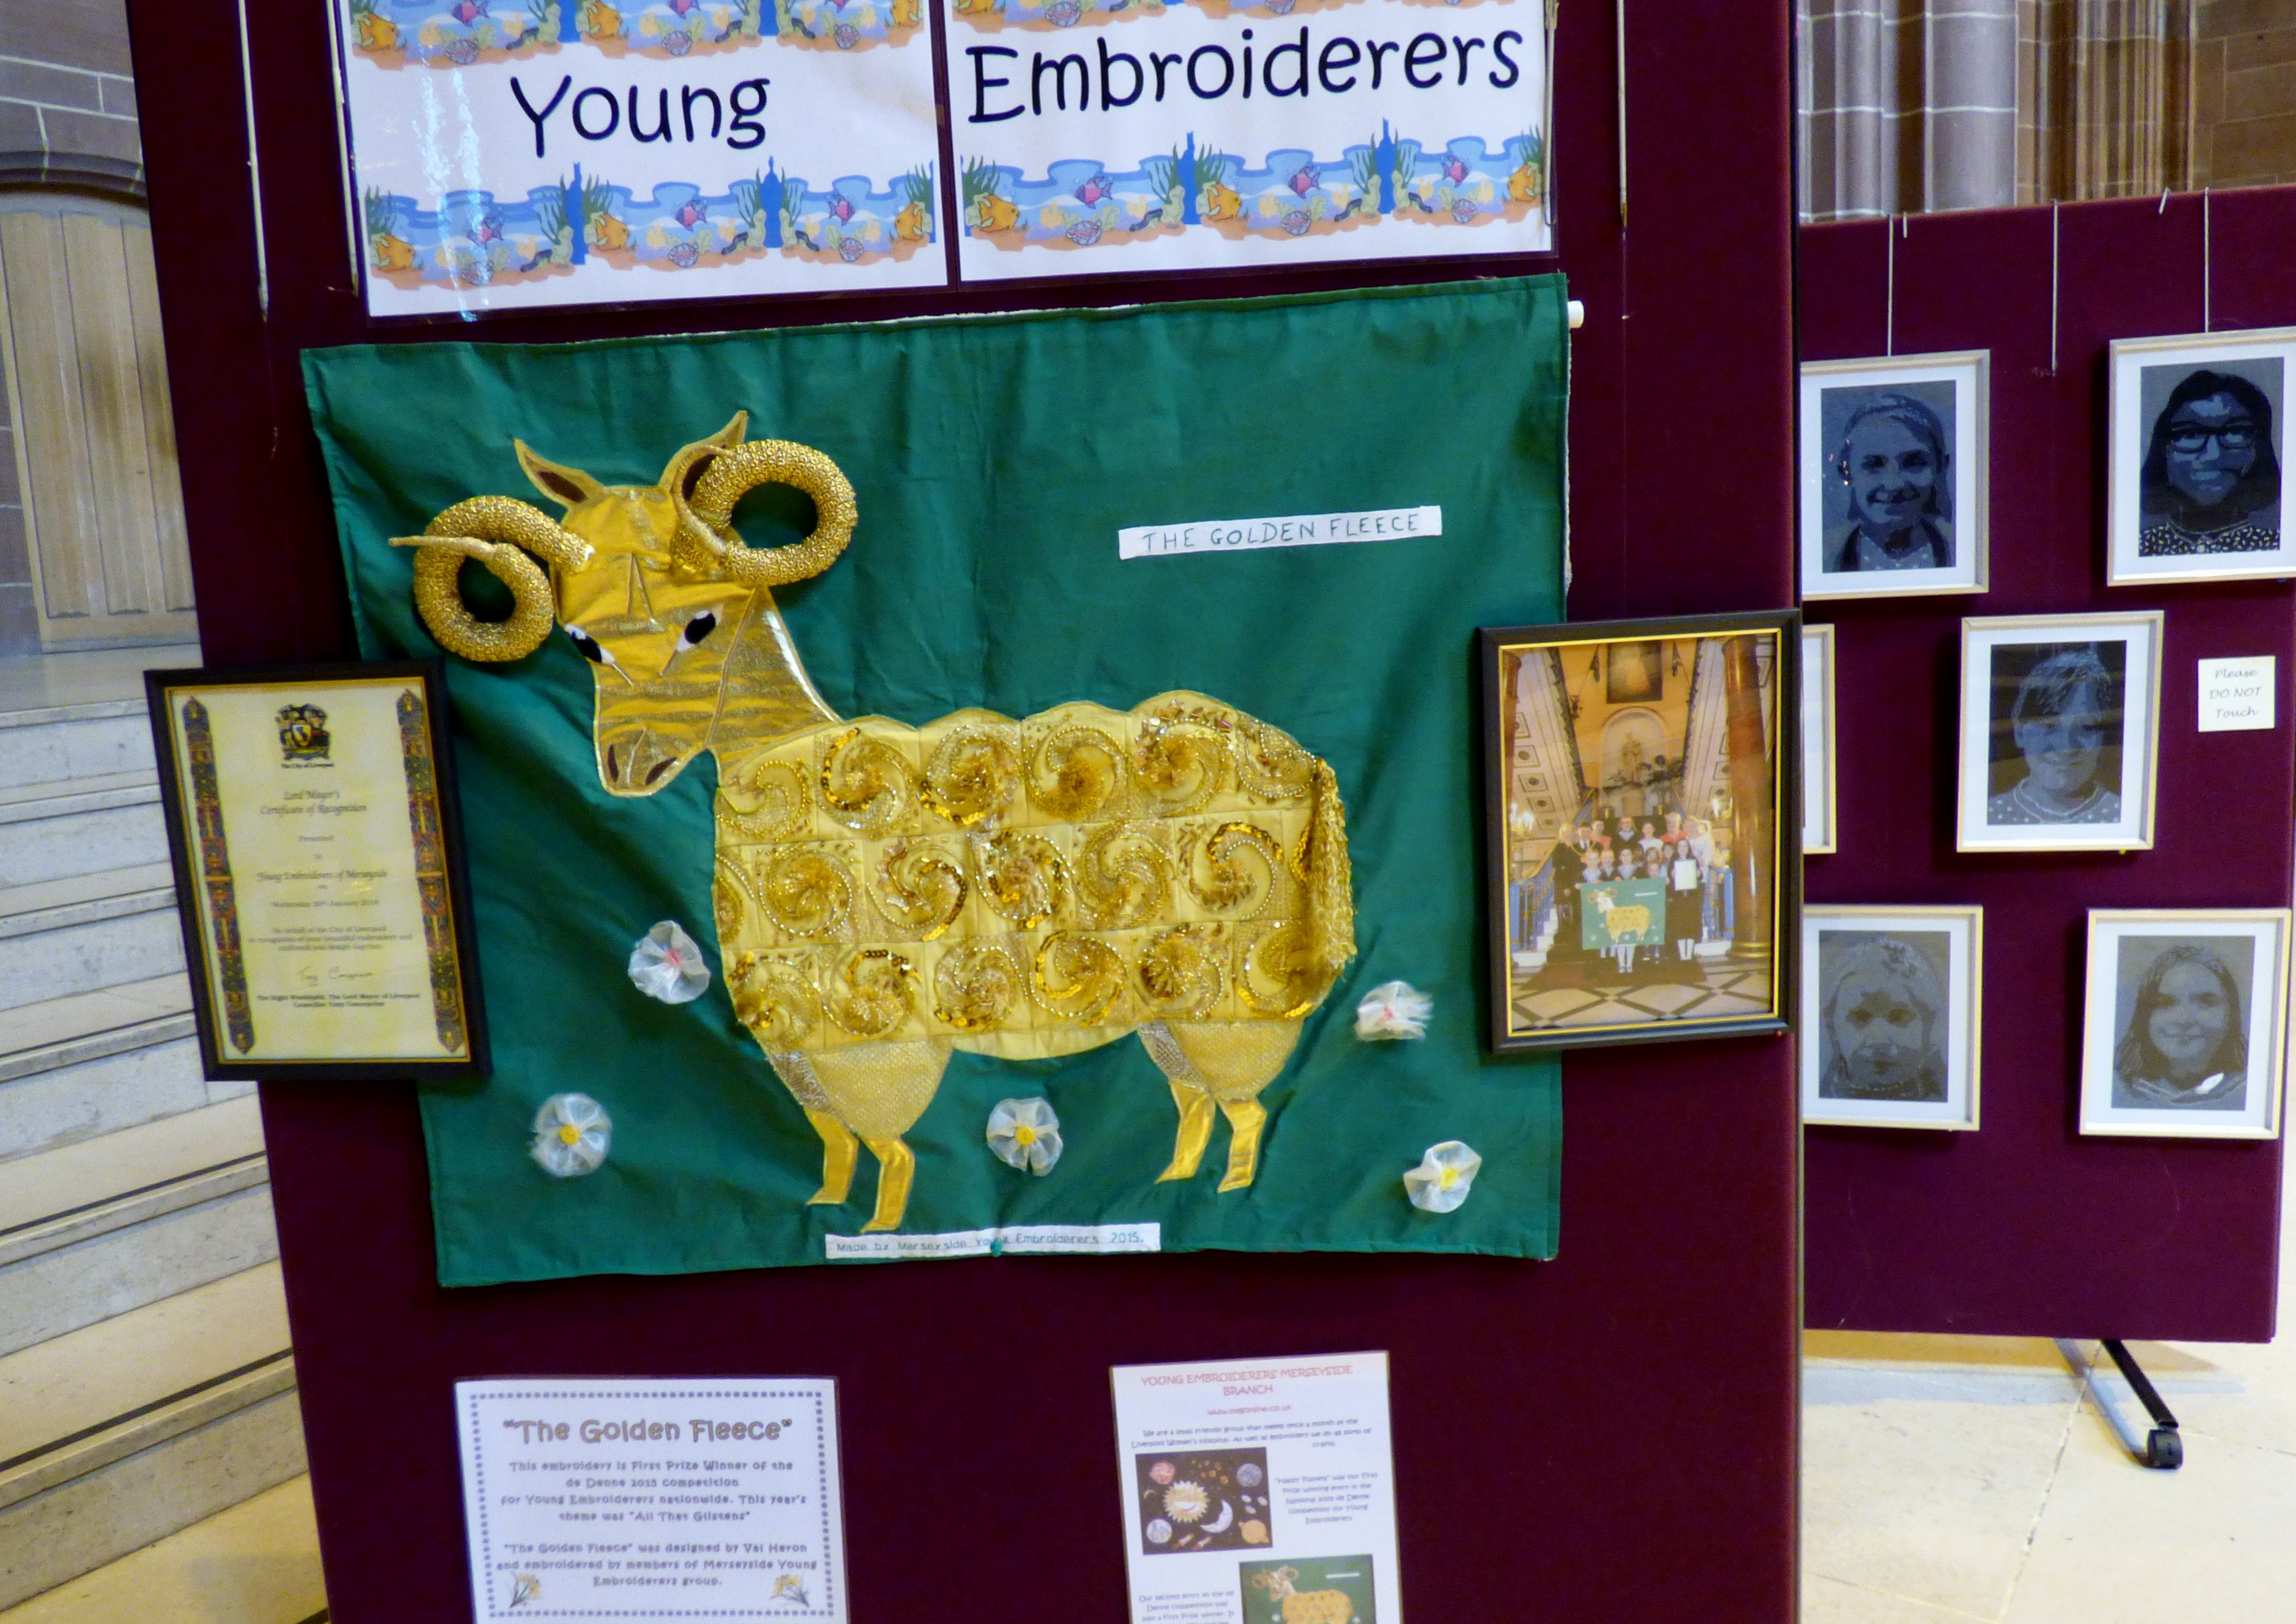 THE GOLDEN FLEECE by Merseyside Young Embroiderers at 60 Glorious Years exhibition, Liverpool Anglican Cathedral 2016